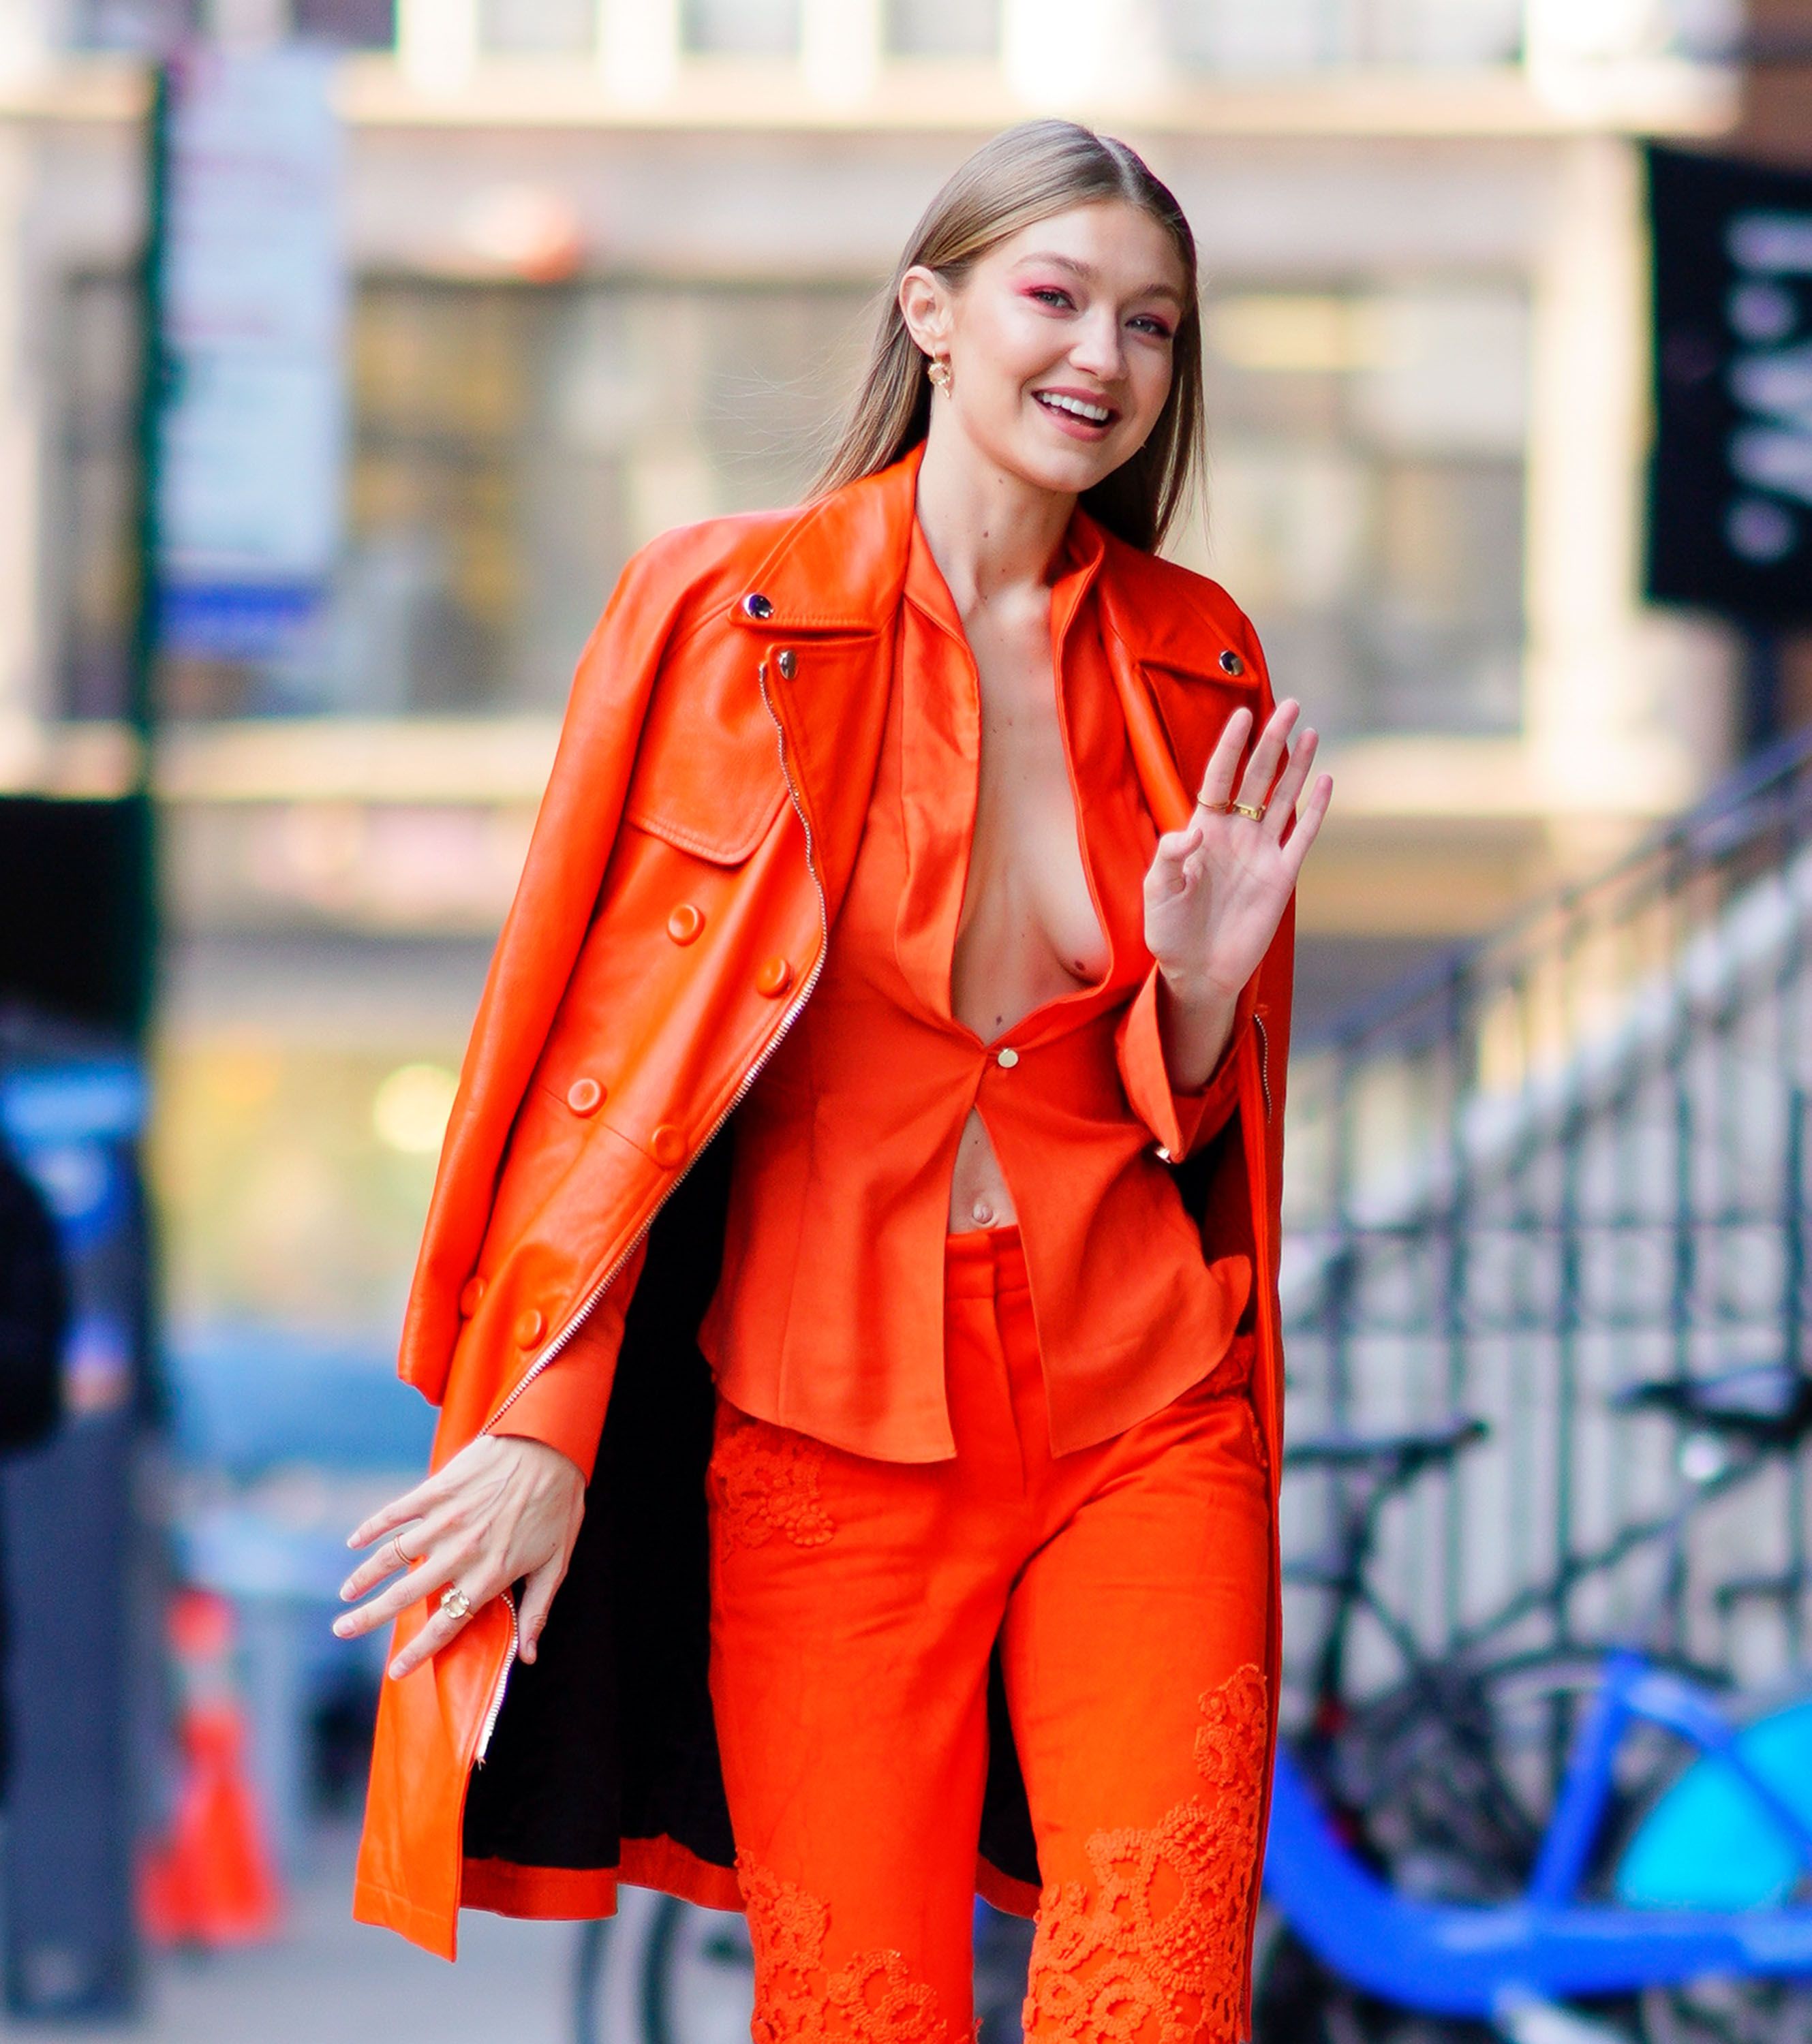 Gigi Hadid Out in Soho January 5, 2016 – Star Style